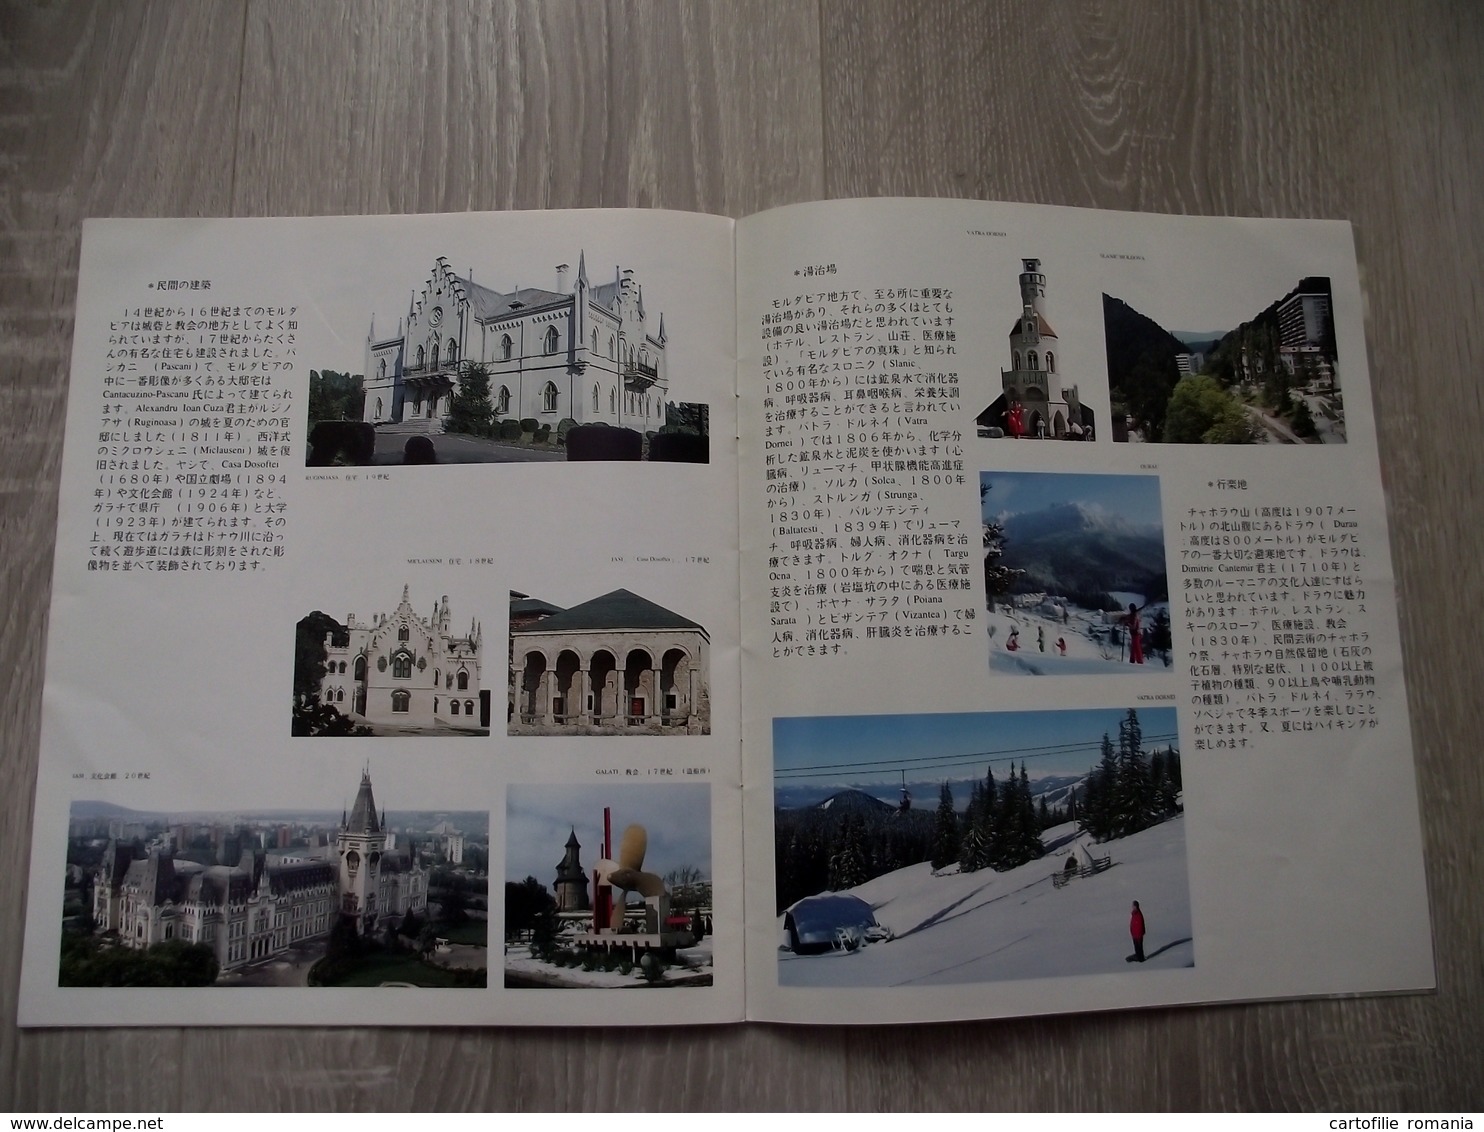 China Chine - Romania - Bukowina Bucovina tourism guide - Illustrated edition - 15 pages - Map karte carte - see scans